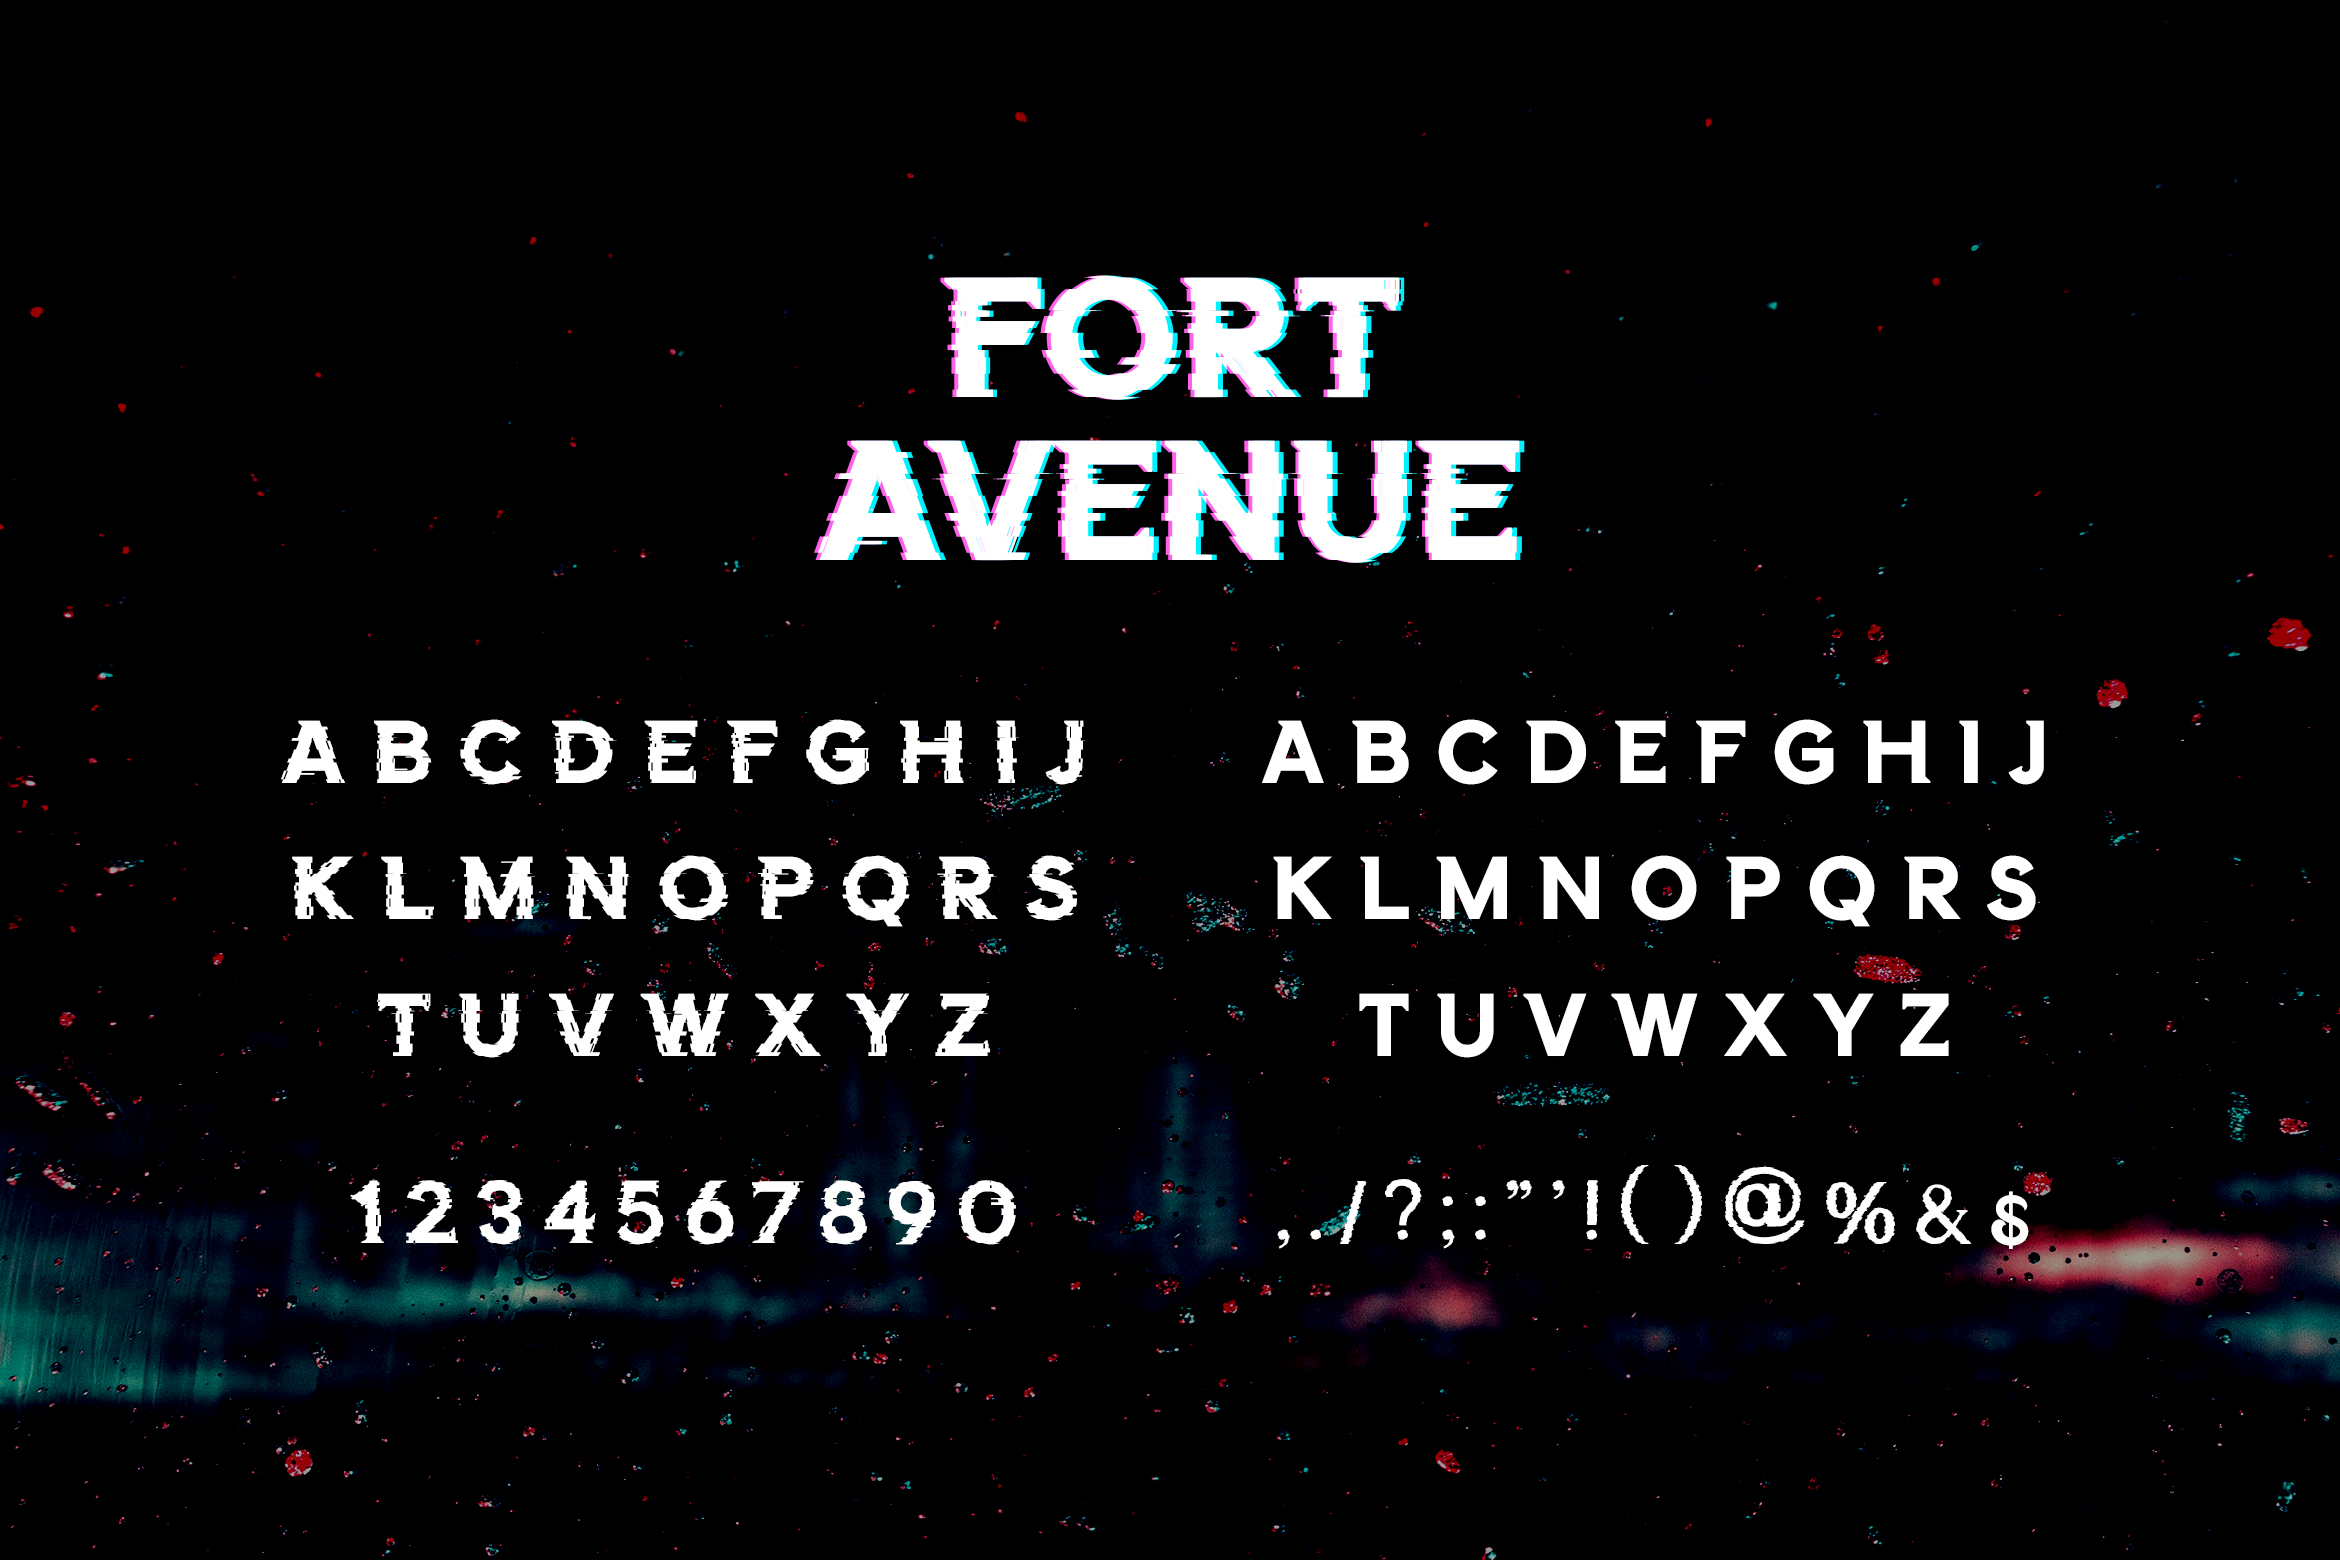 FORT AVENUE